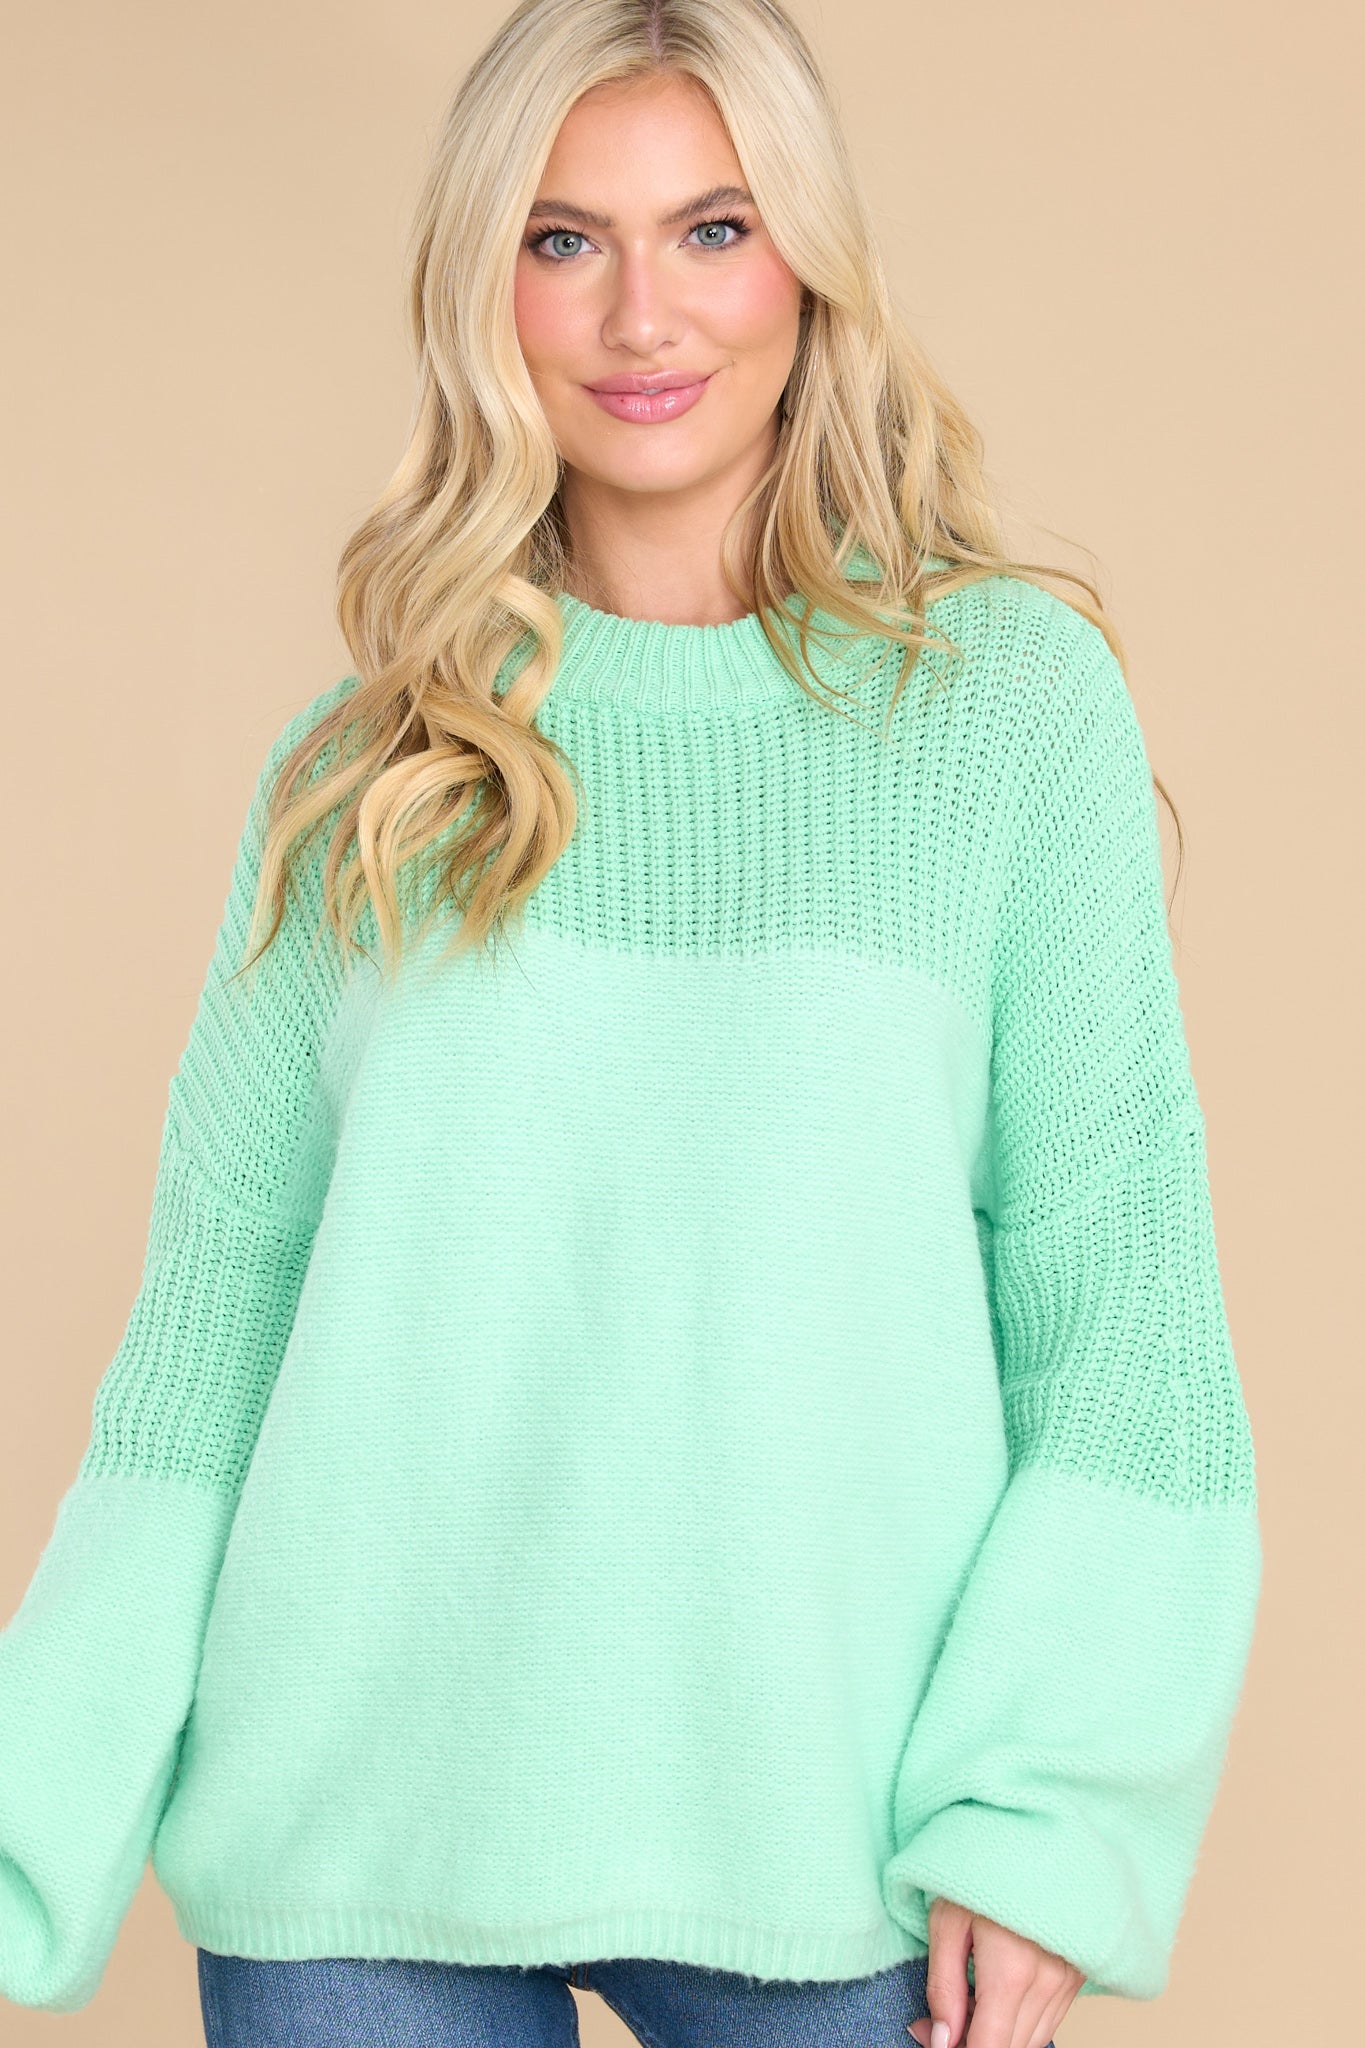 Homebody At Heart Spearmint Green Sweater - Red Dress